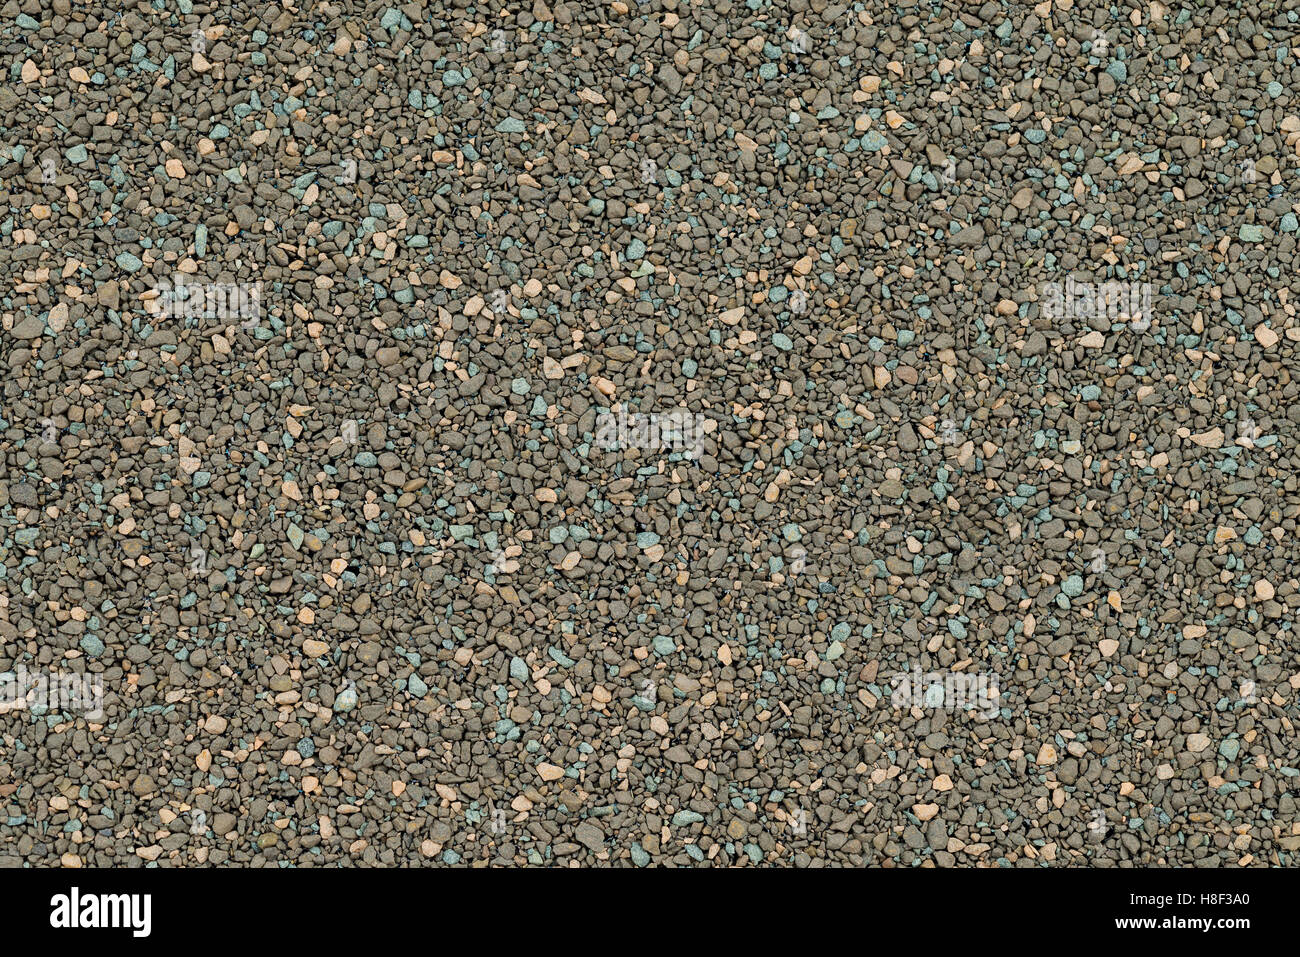 Close up detail of Granular Roofing Material used on Flat Roof. Stock Photo